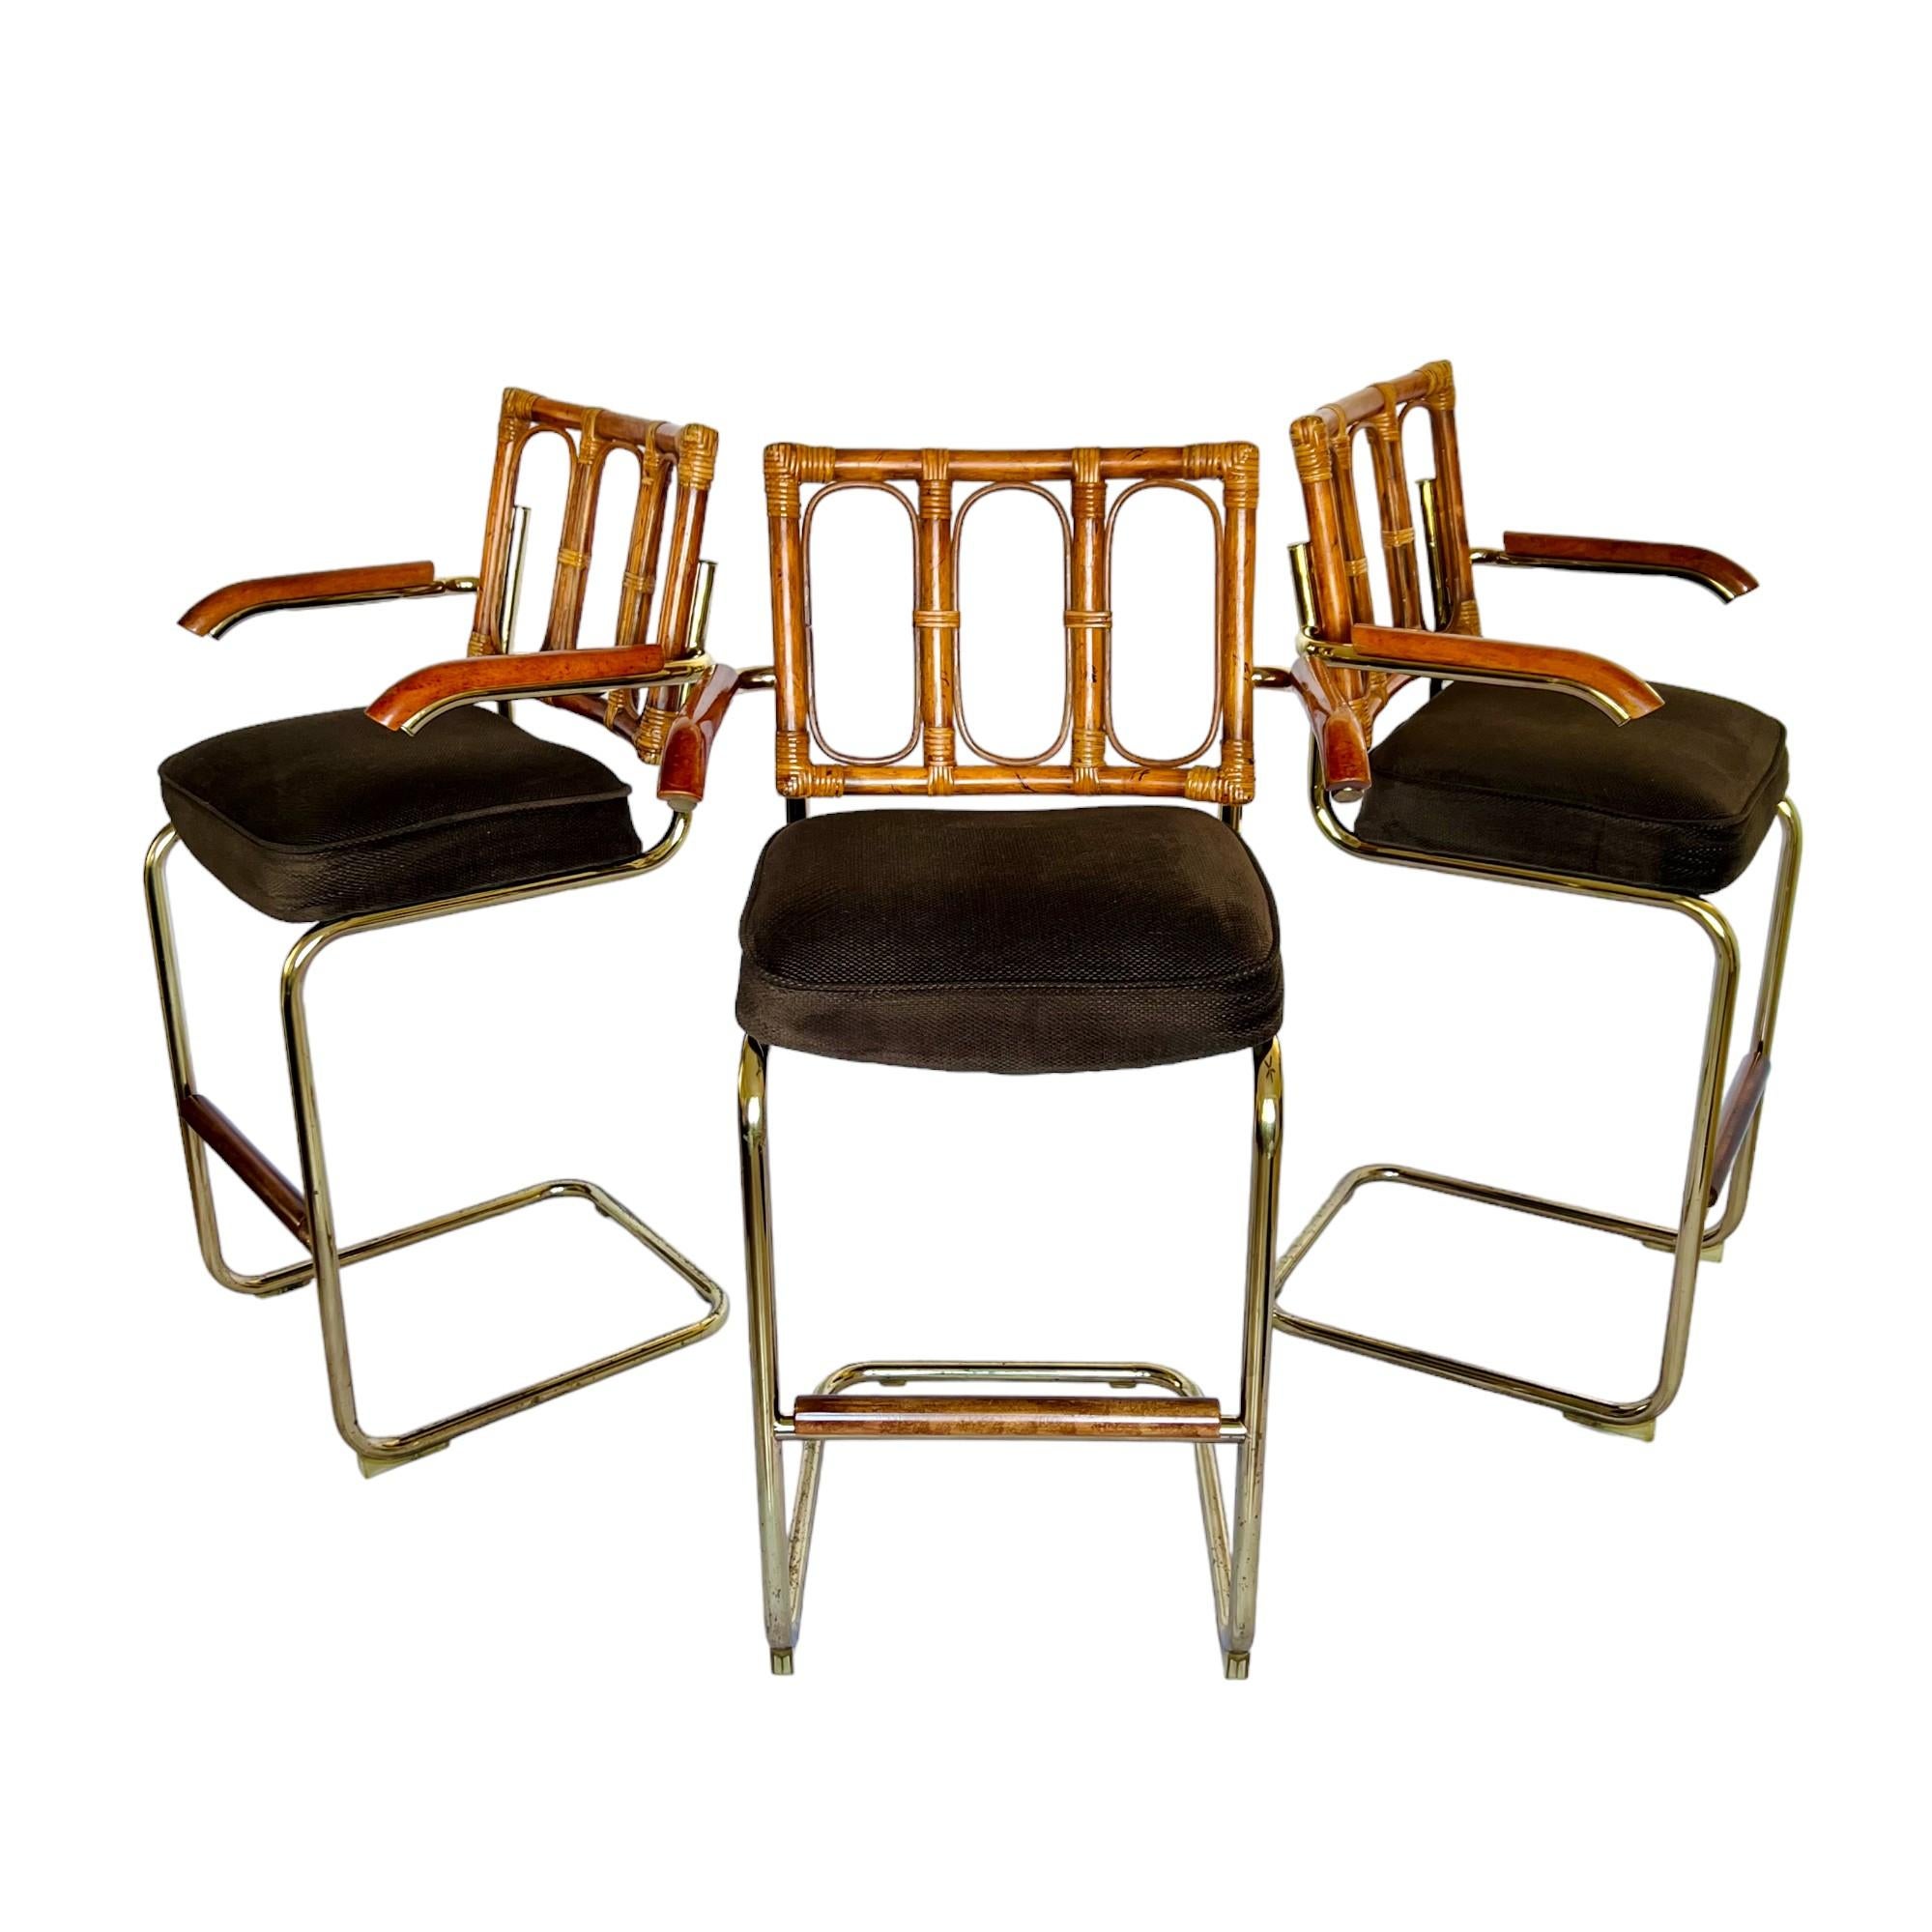 American Mid-Century Modern Rattan and Tubular Brass Cantilever Bar Stools, Set of 3 For Sale